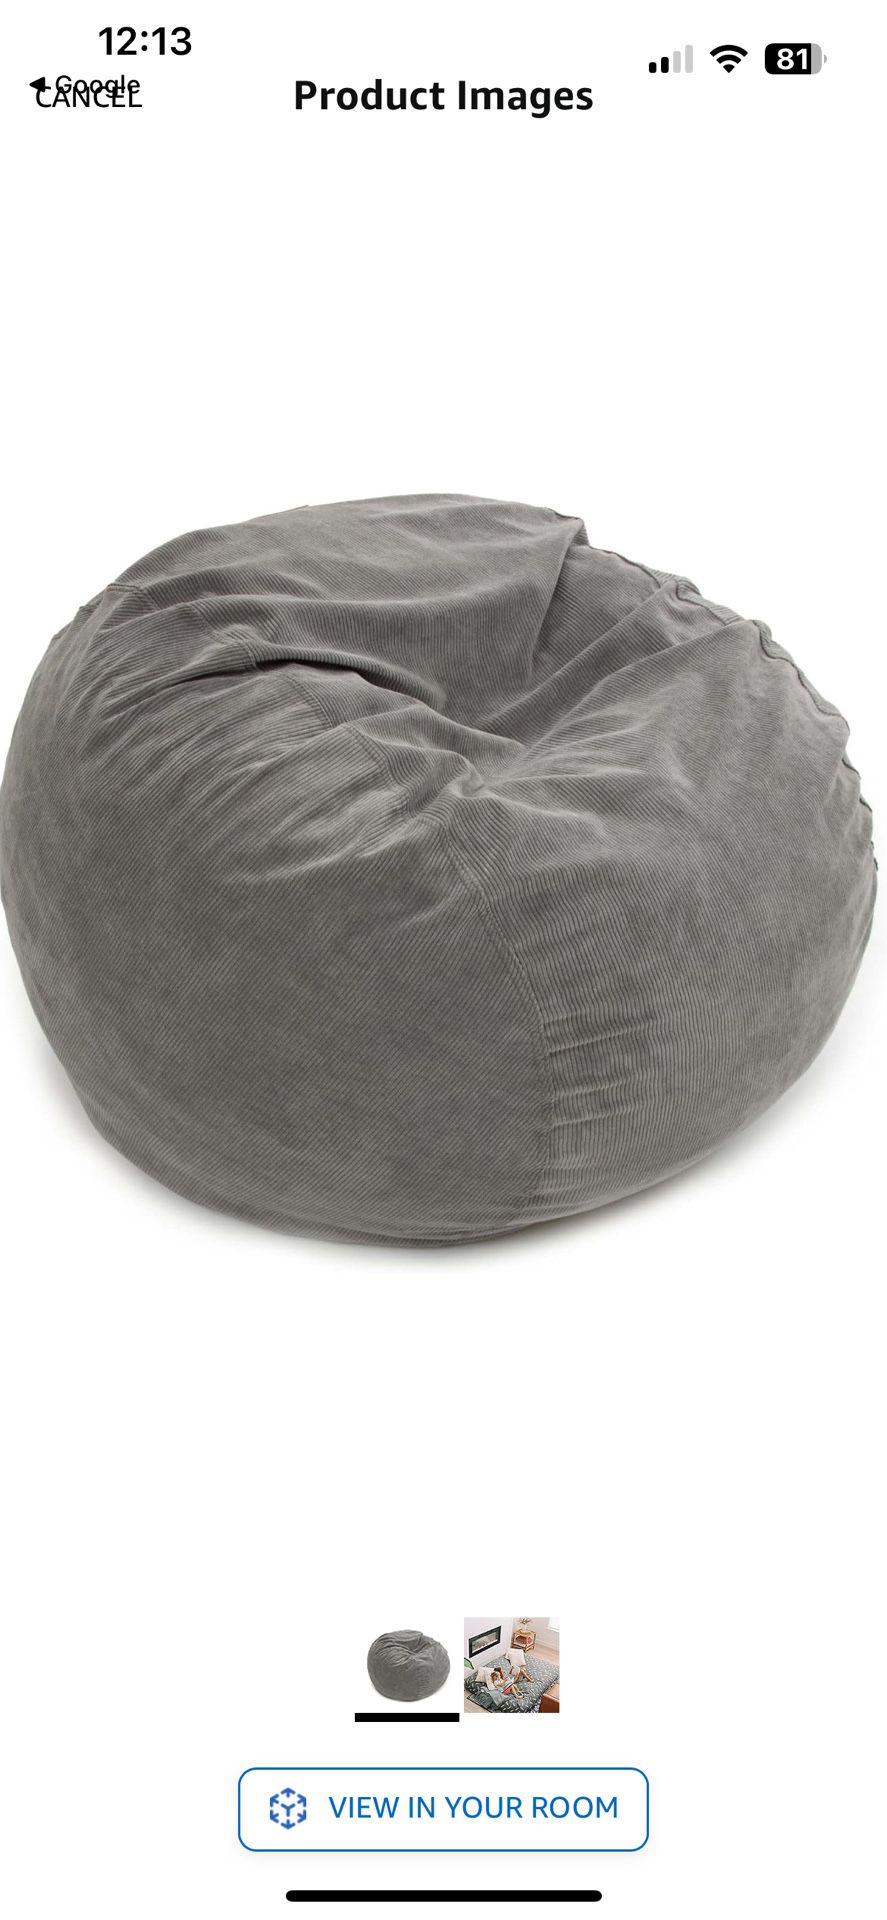 CordRoy’s Full Size Bean Bag Chair and Bed